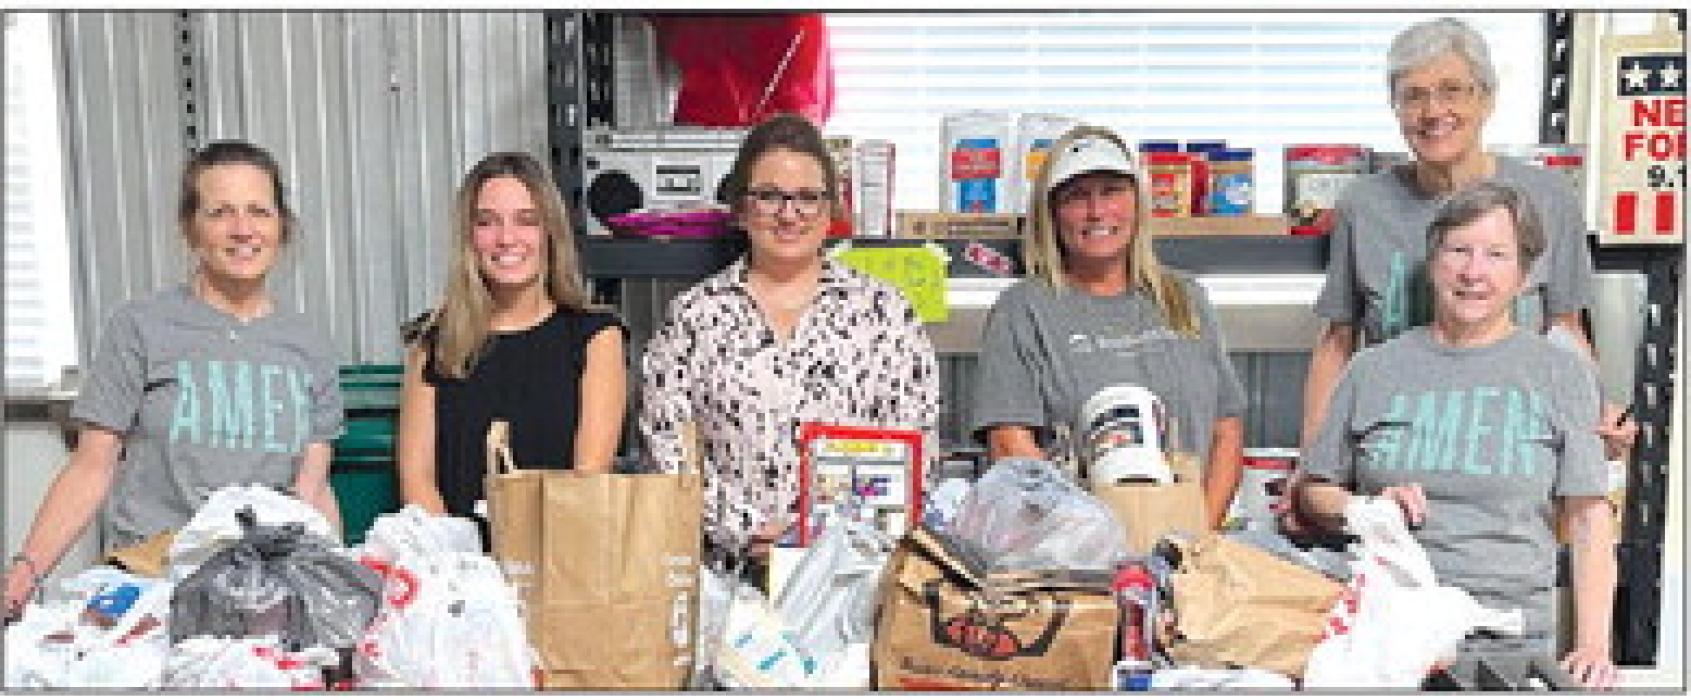 The La Grange area WoodmenLife recently donated to the AMEN Food Pantry in La Grange.